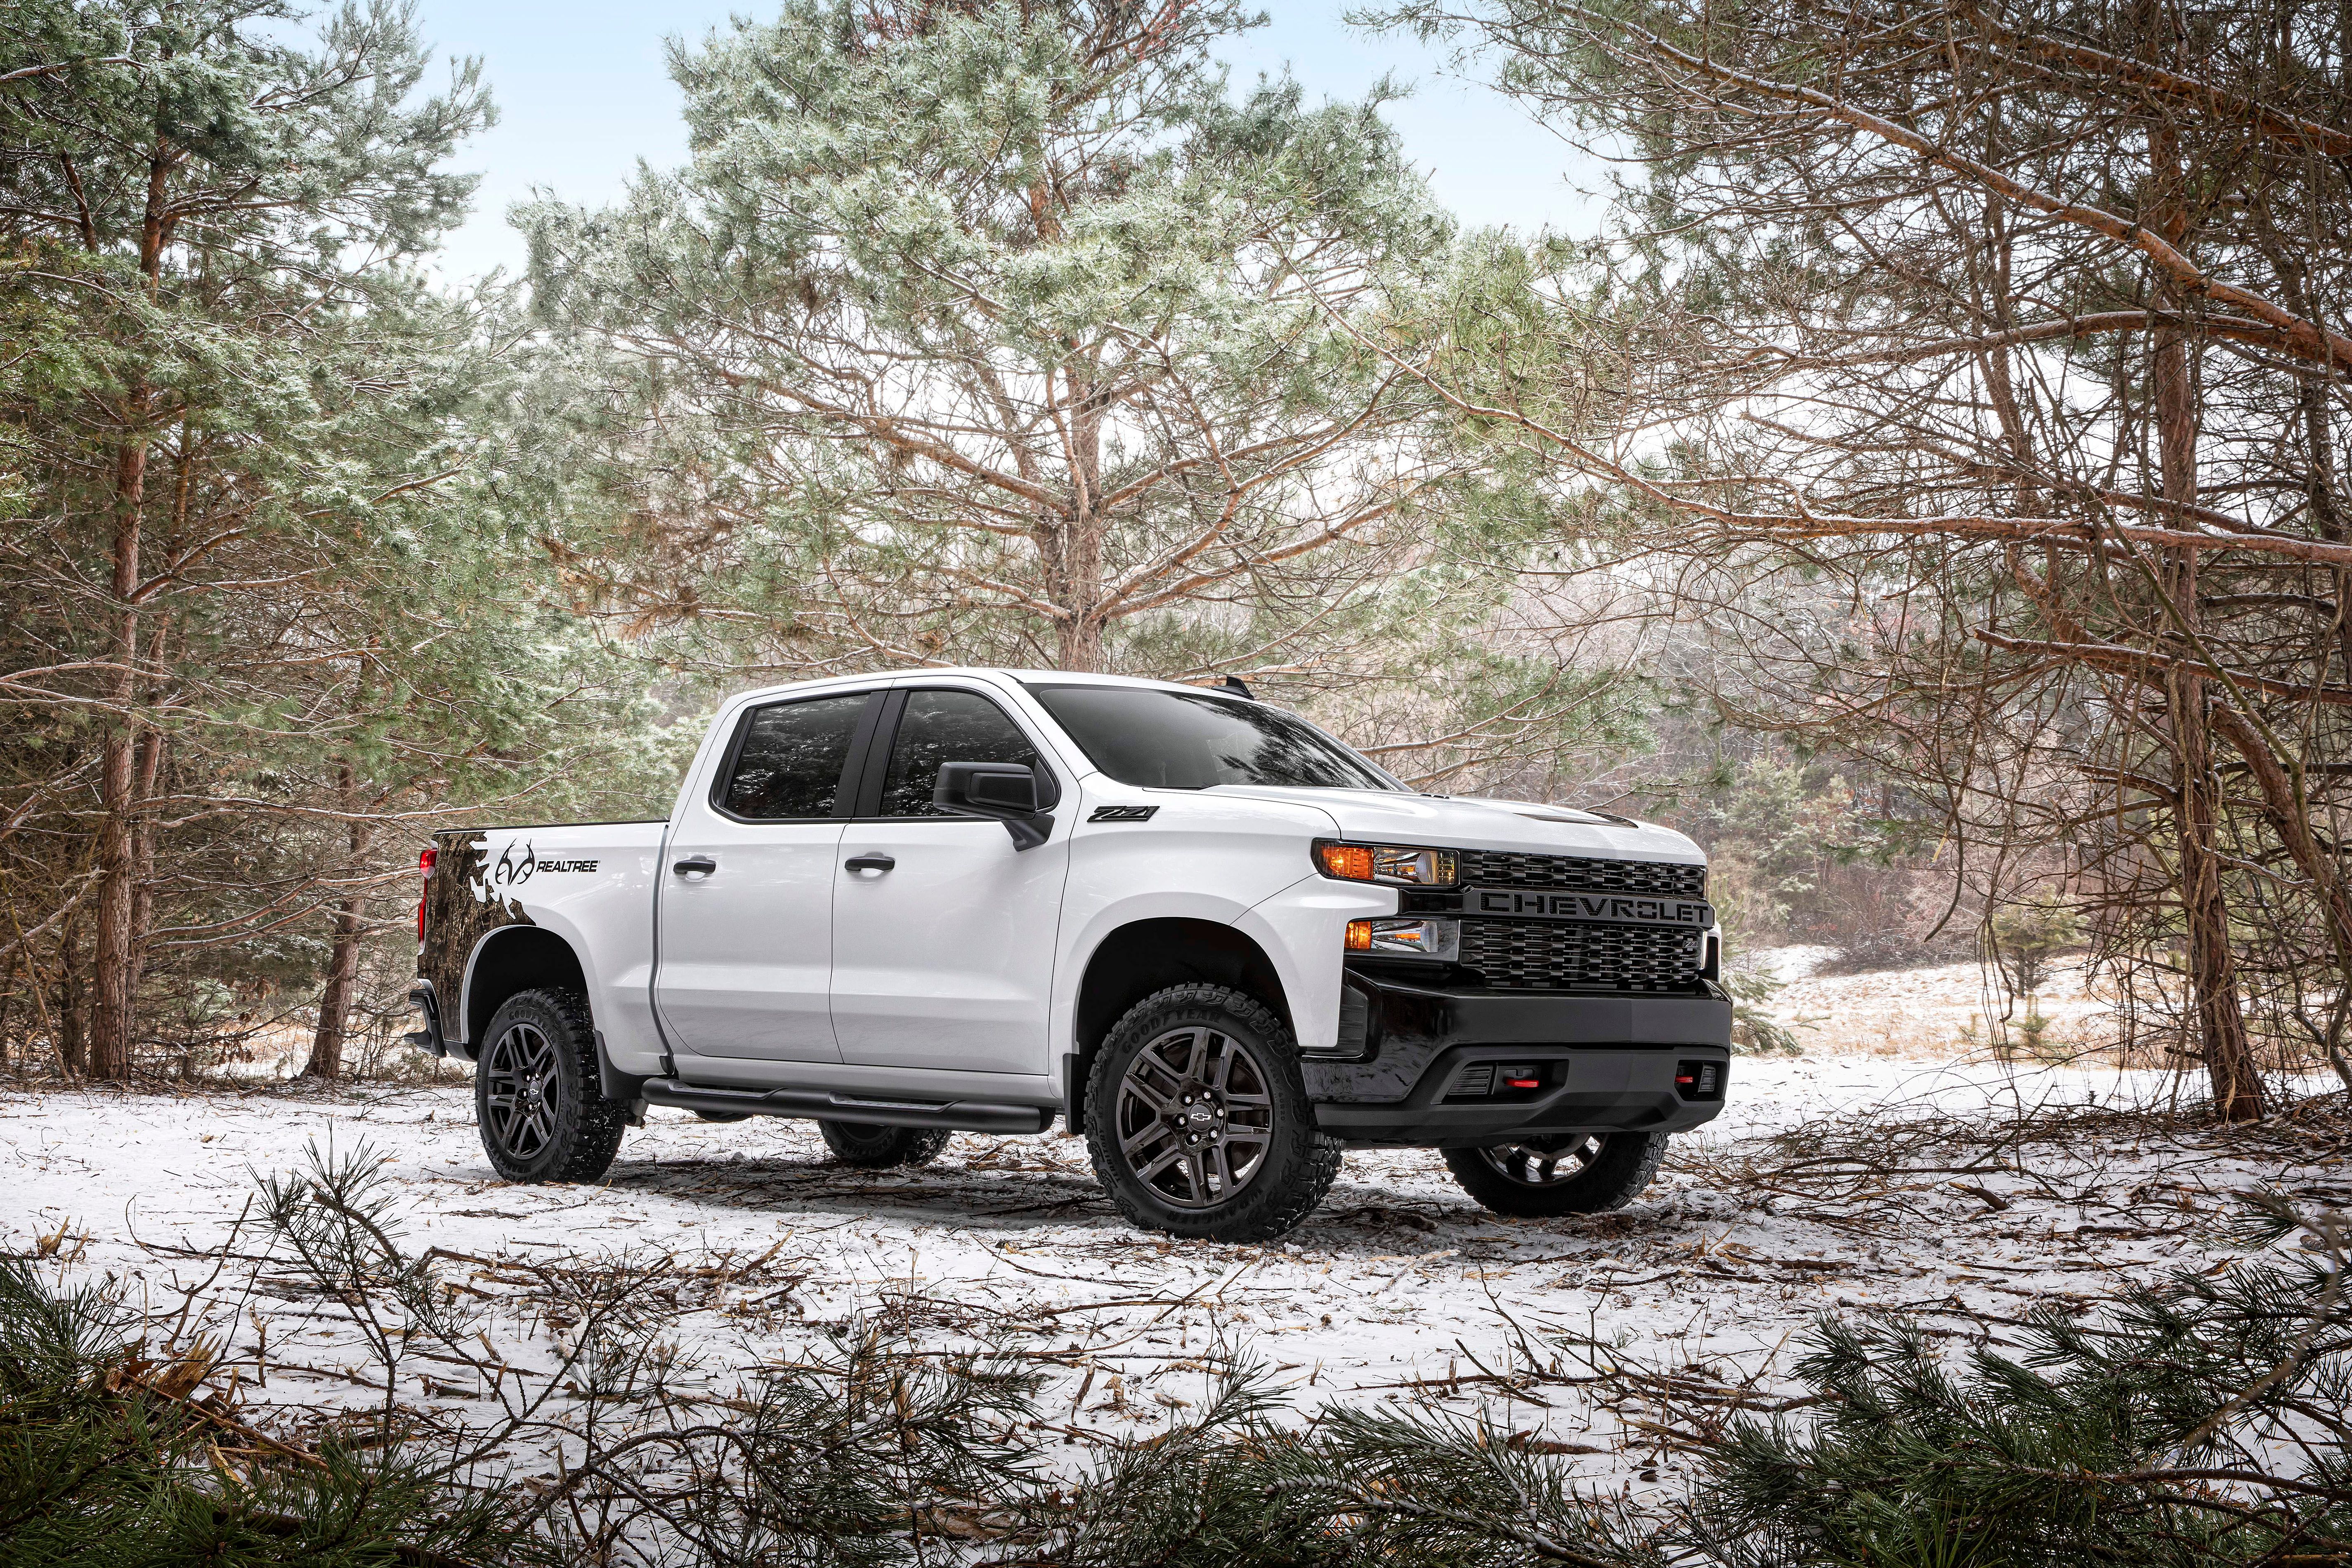 2021 Chevrolet Silverado Chevy Pickup Truck New Vehicle Off Road Towing Hauling Performance